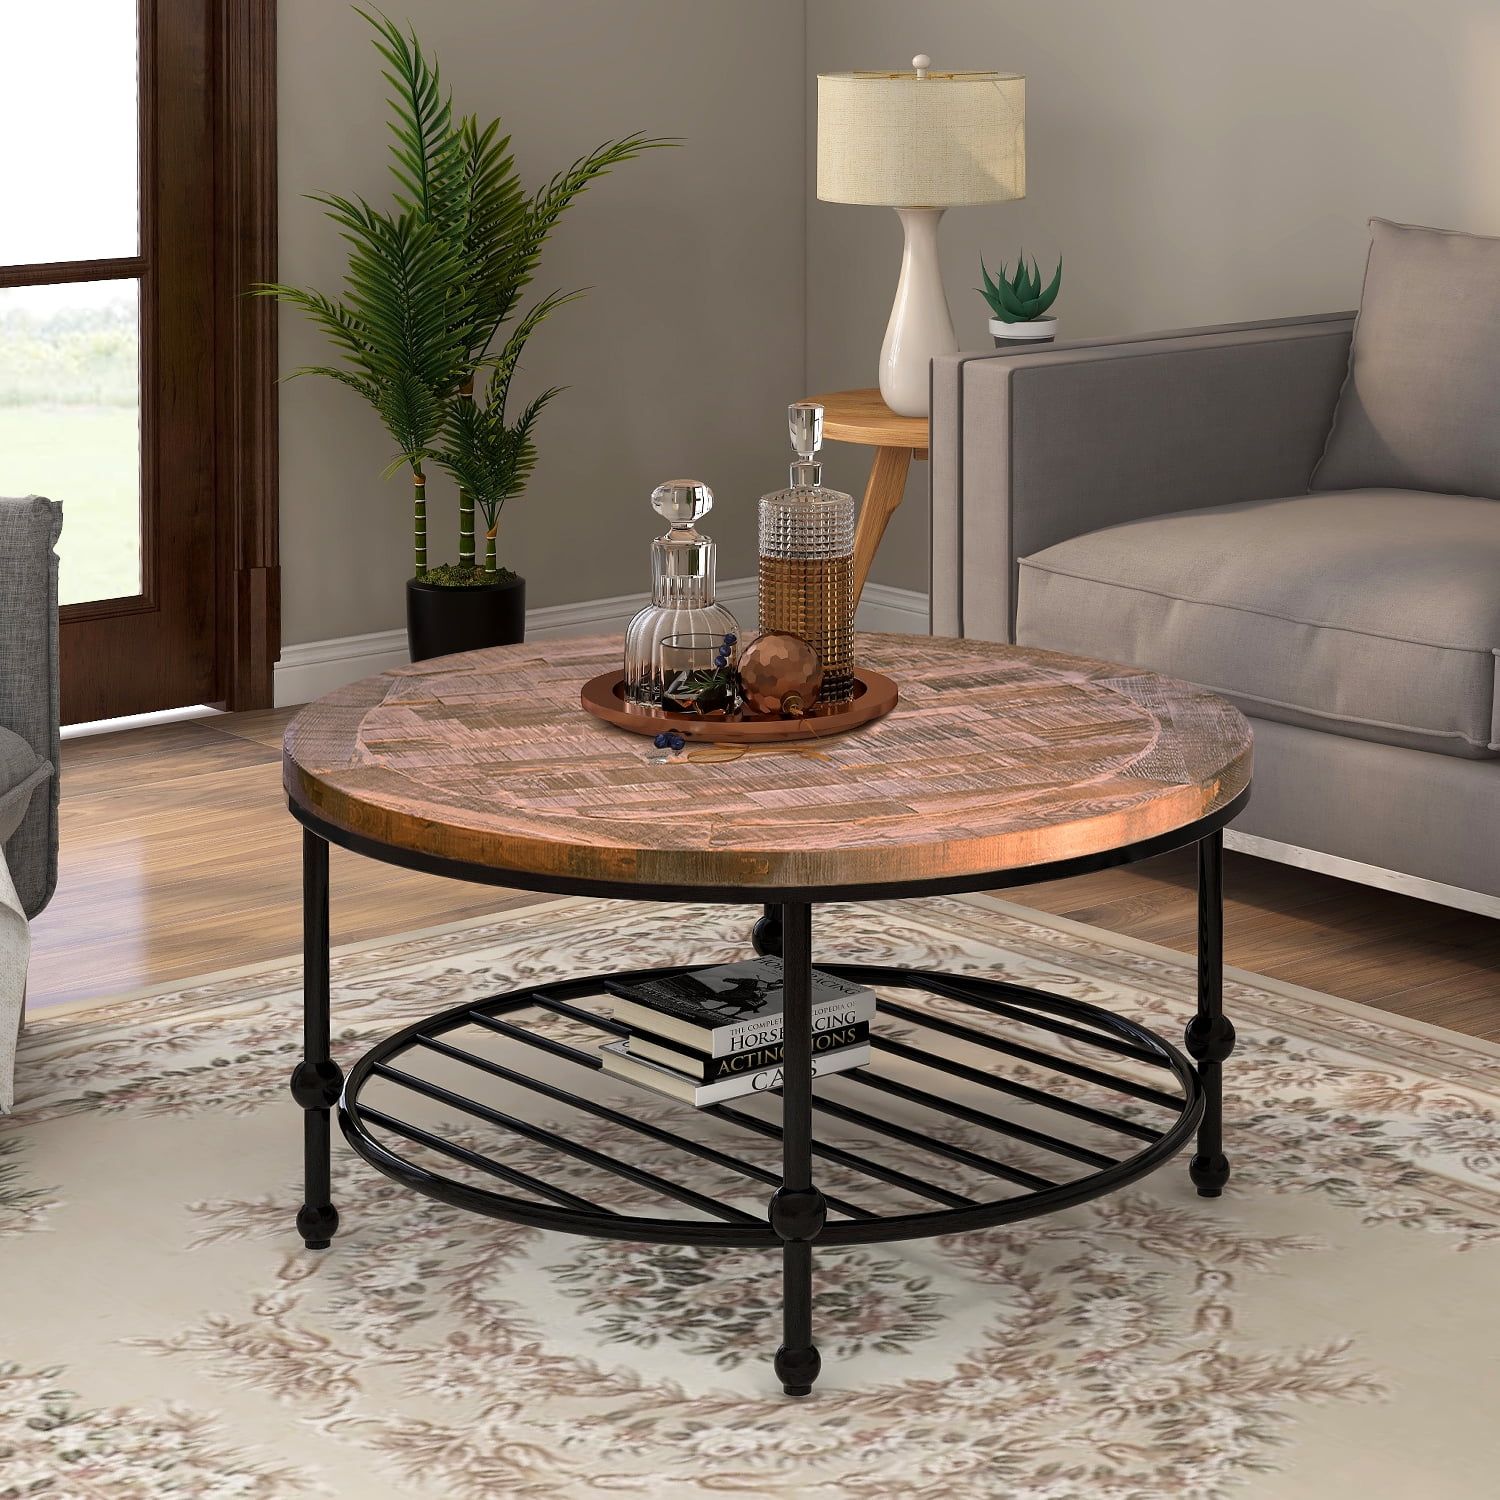 Rustic Natural Round Coffee Table With Storage Shelf For Living Room In Coffee Tables With Open Storage Shelves (Photo 11 of 15)